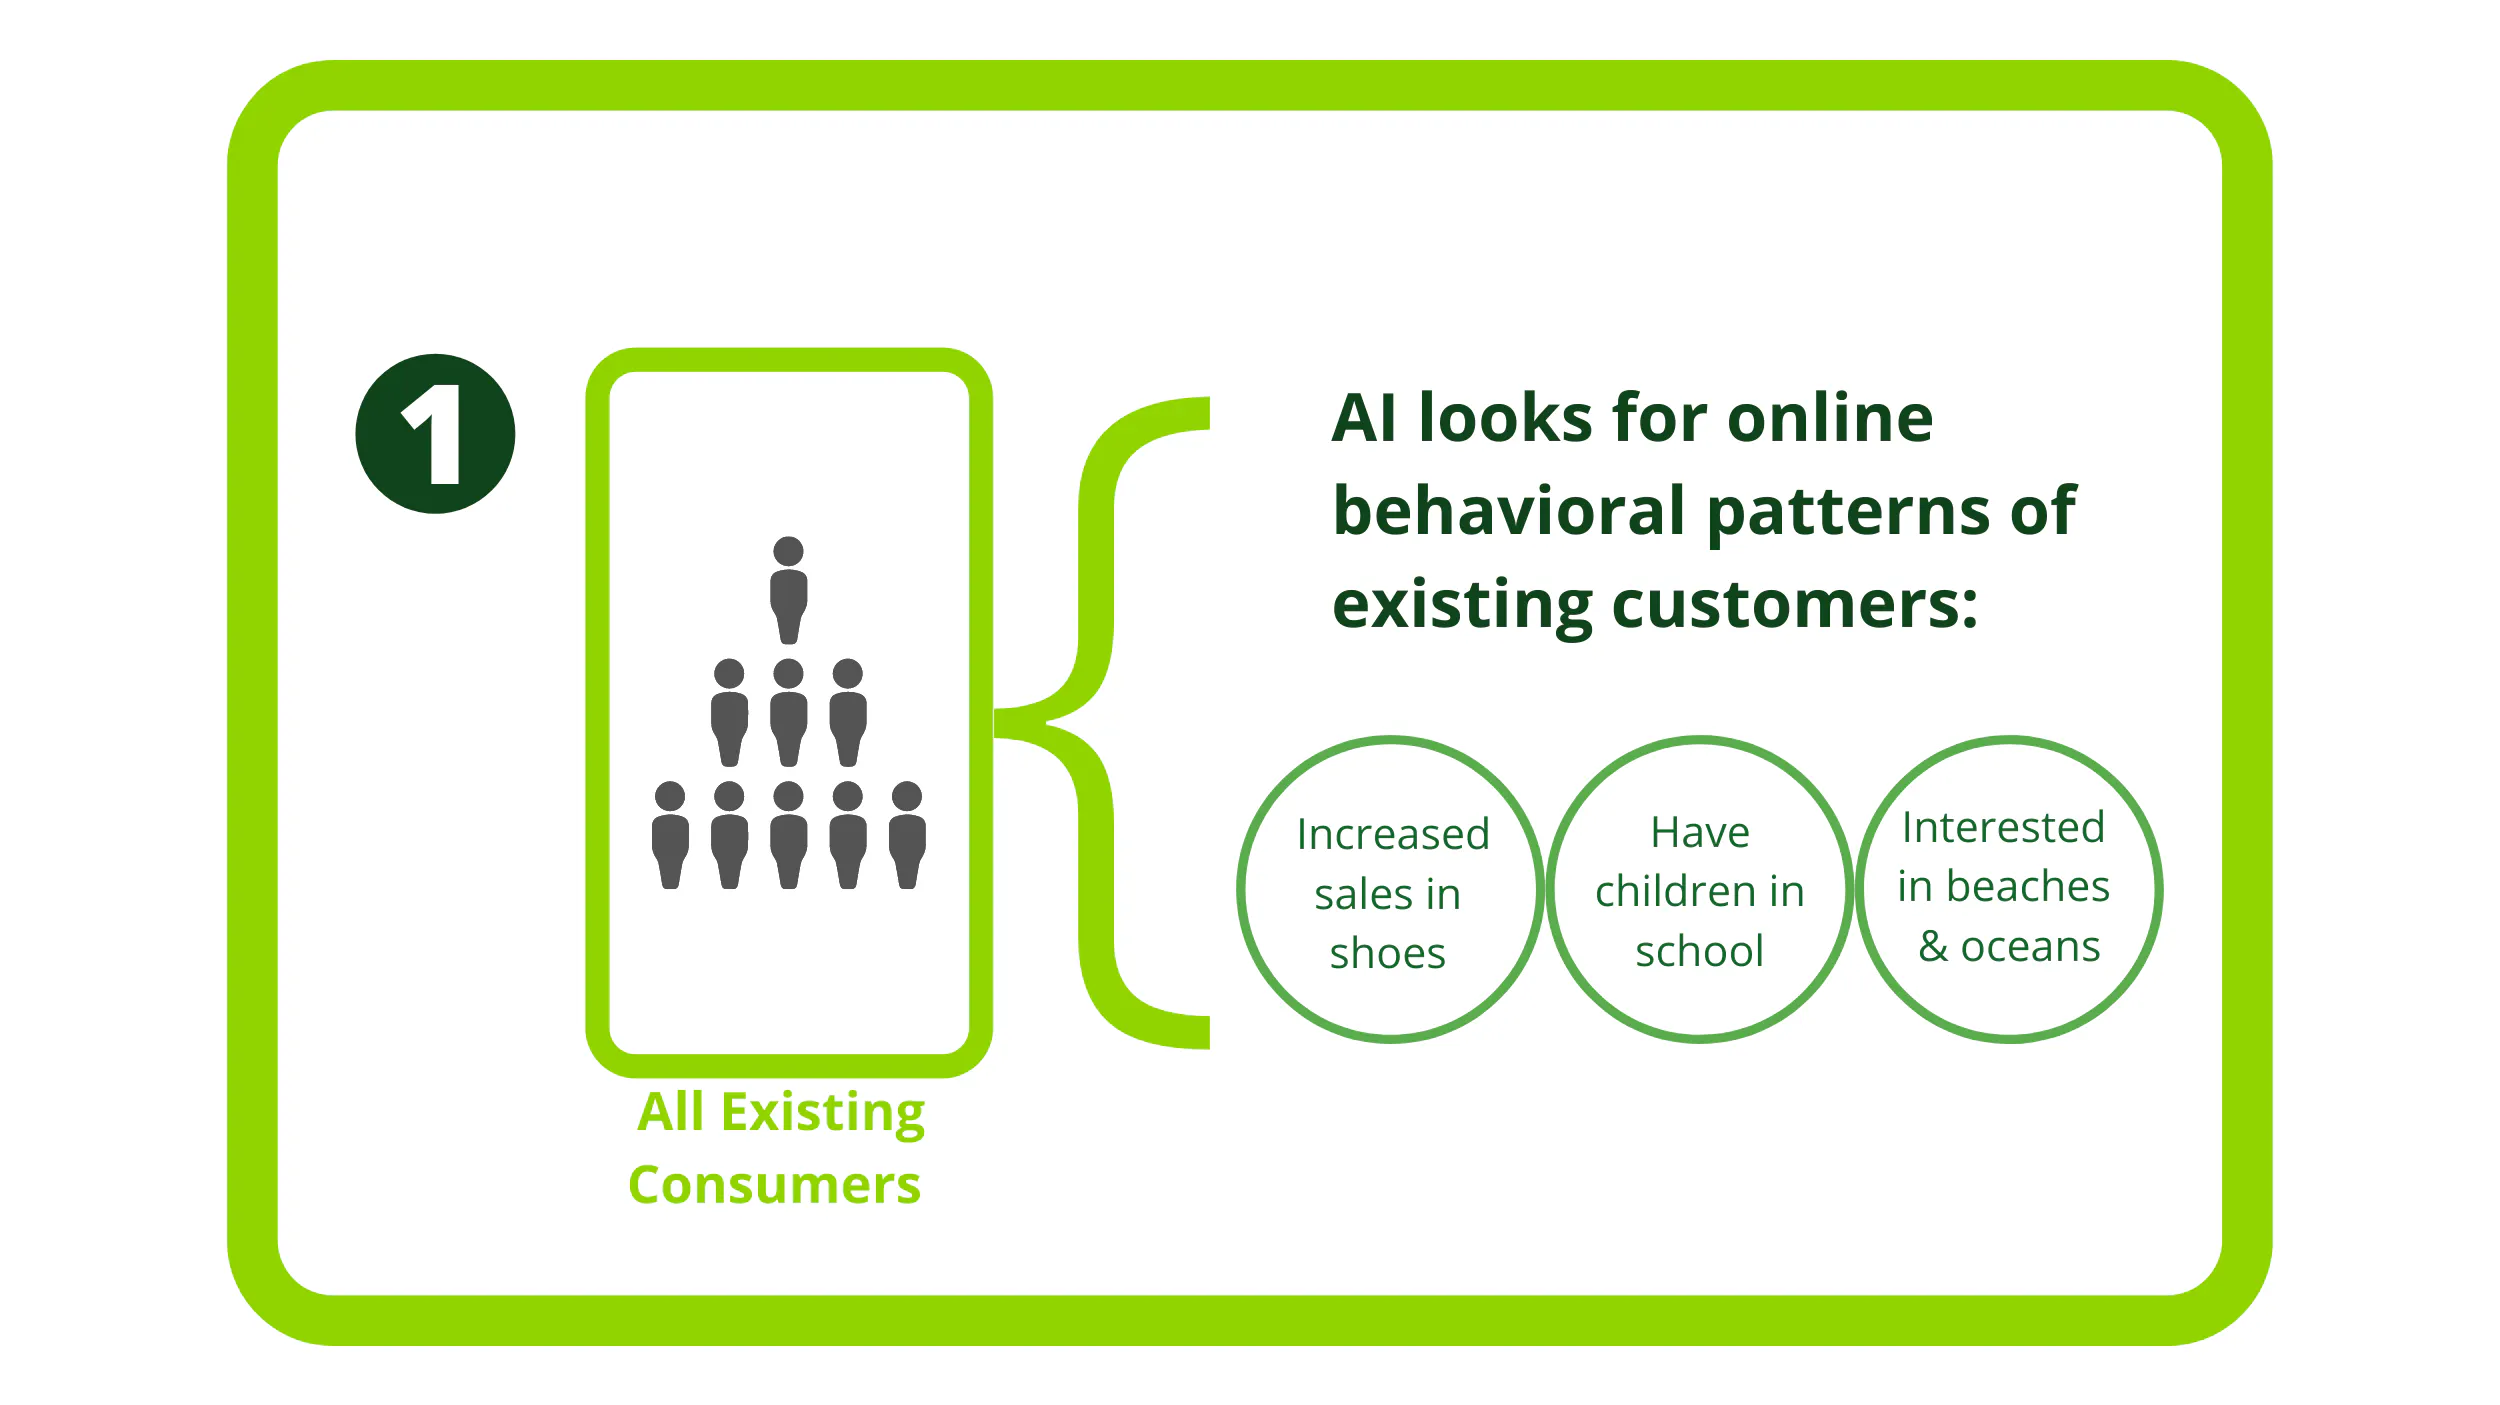 AI looks for online behavioral patterns of all existing customers